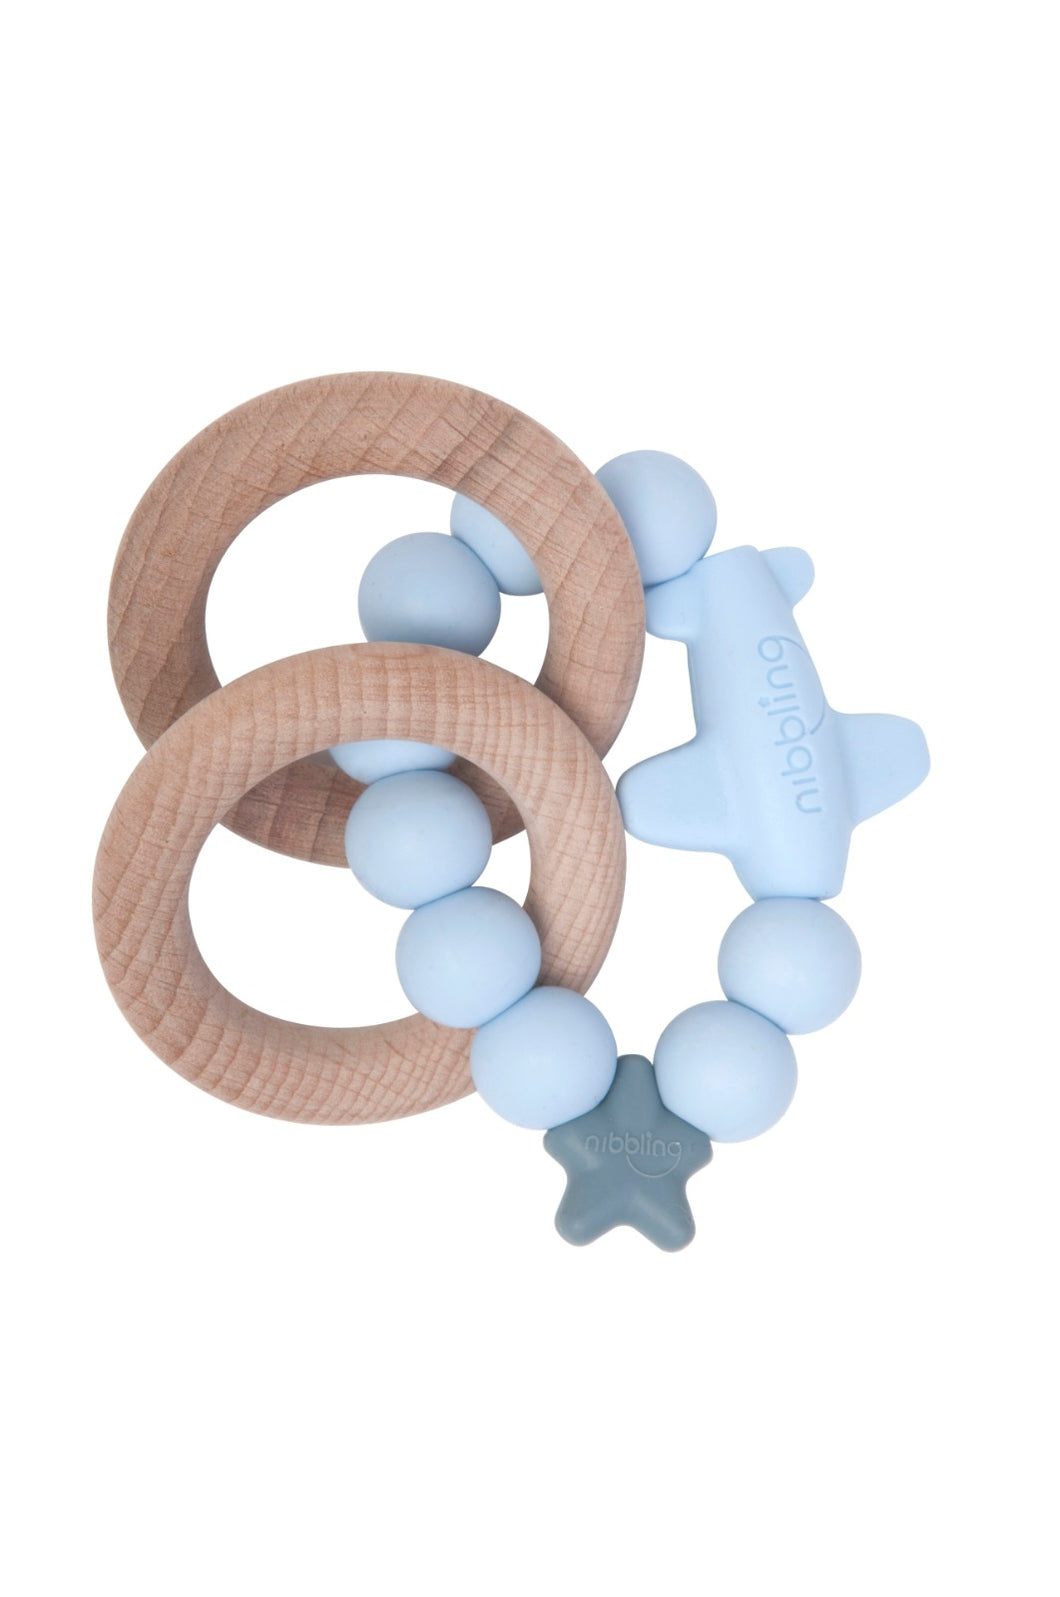 Nibbling Rattle Ring - Jet Natural